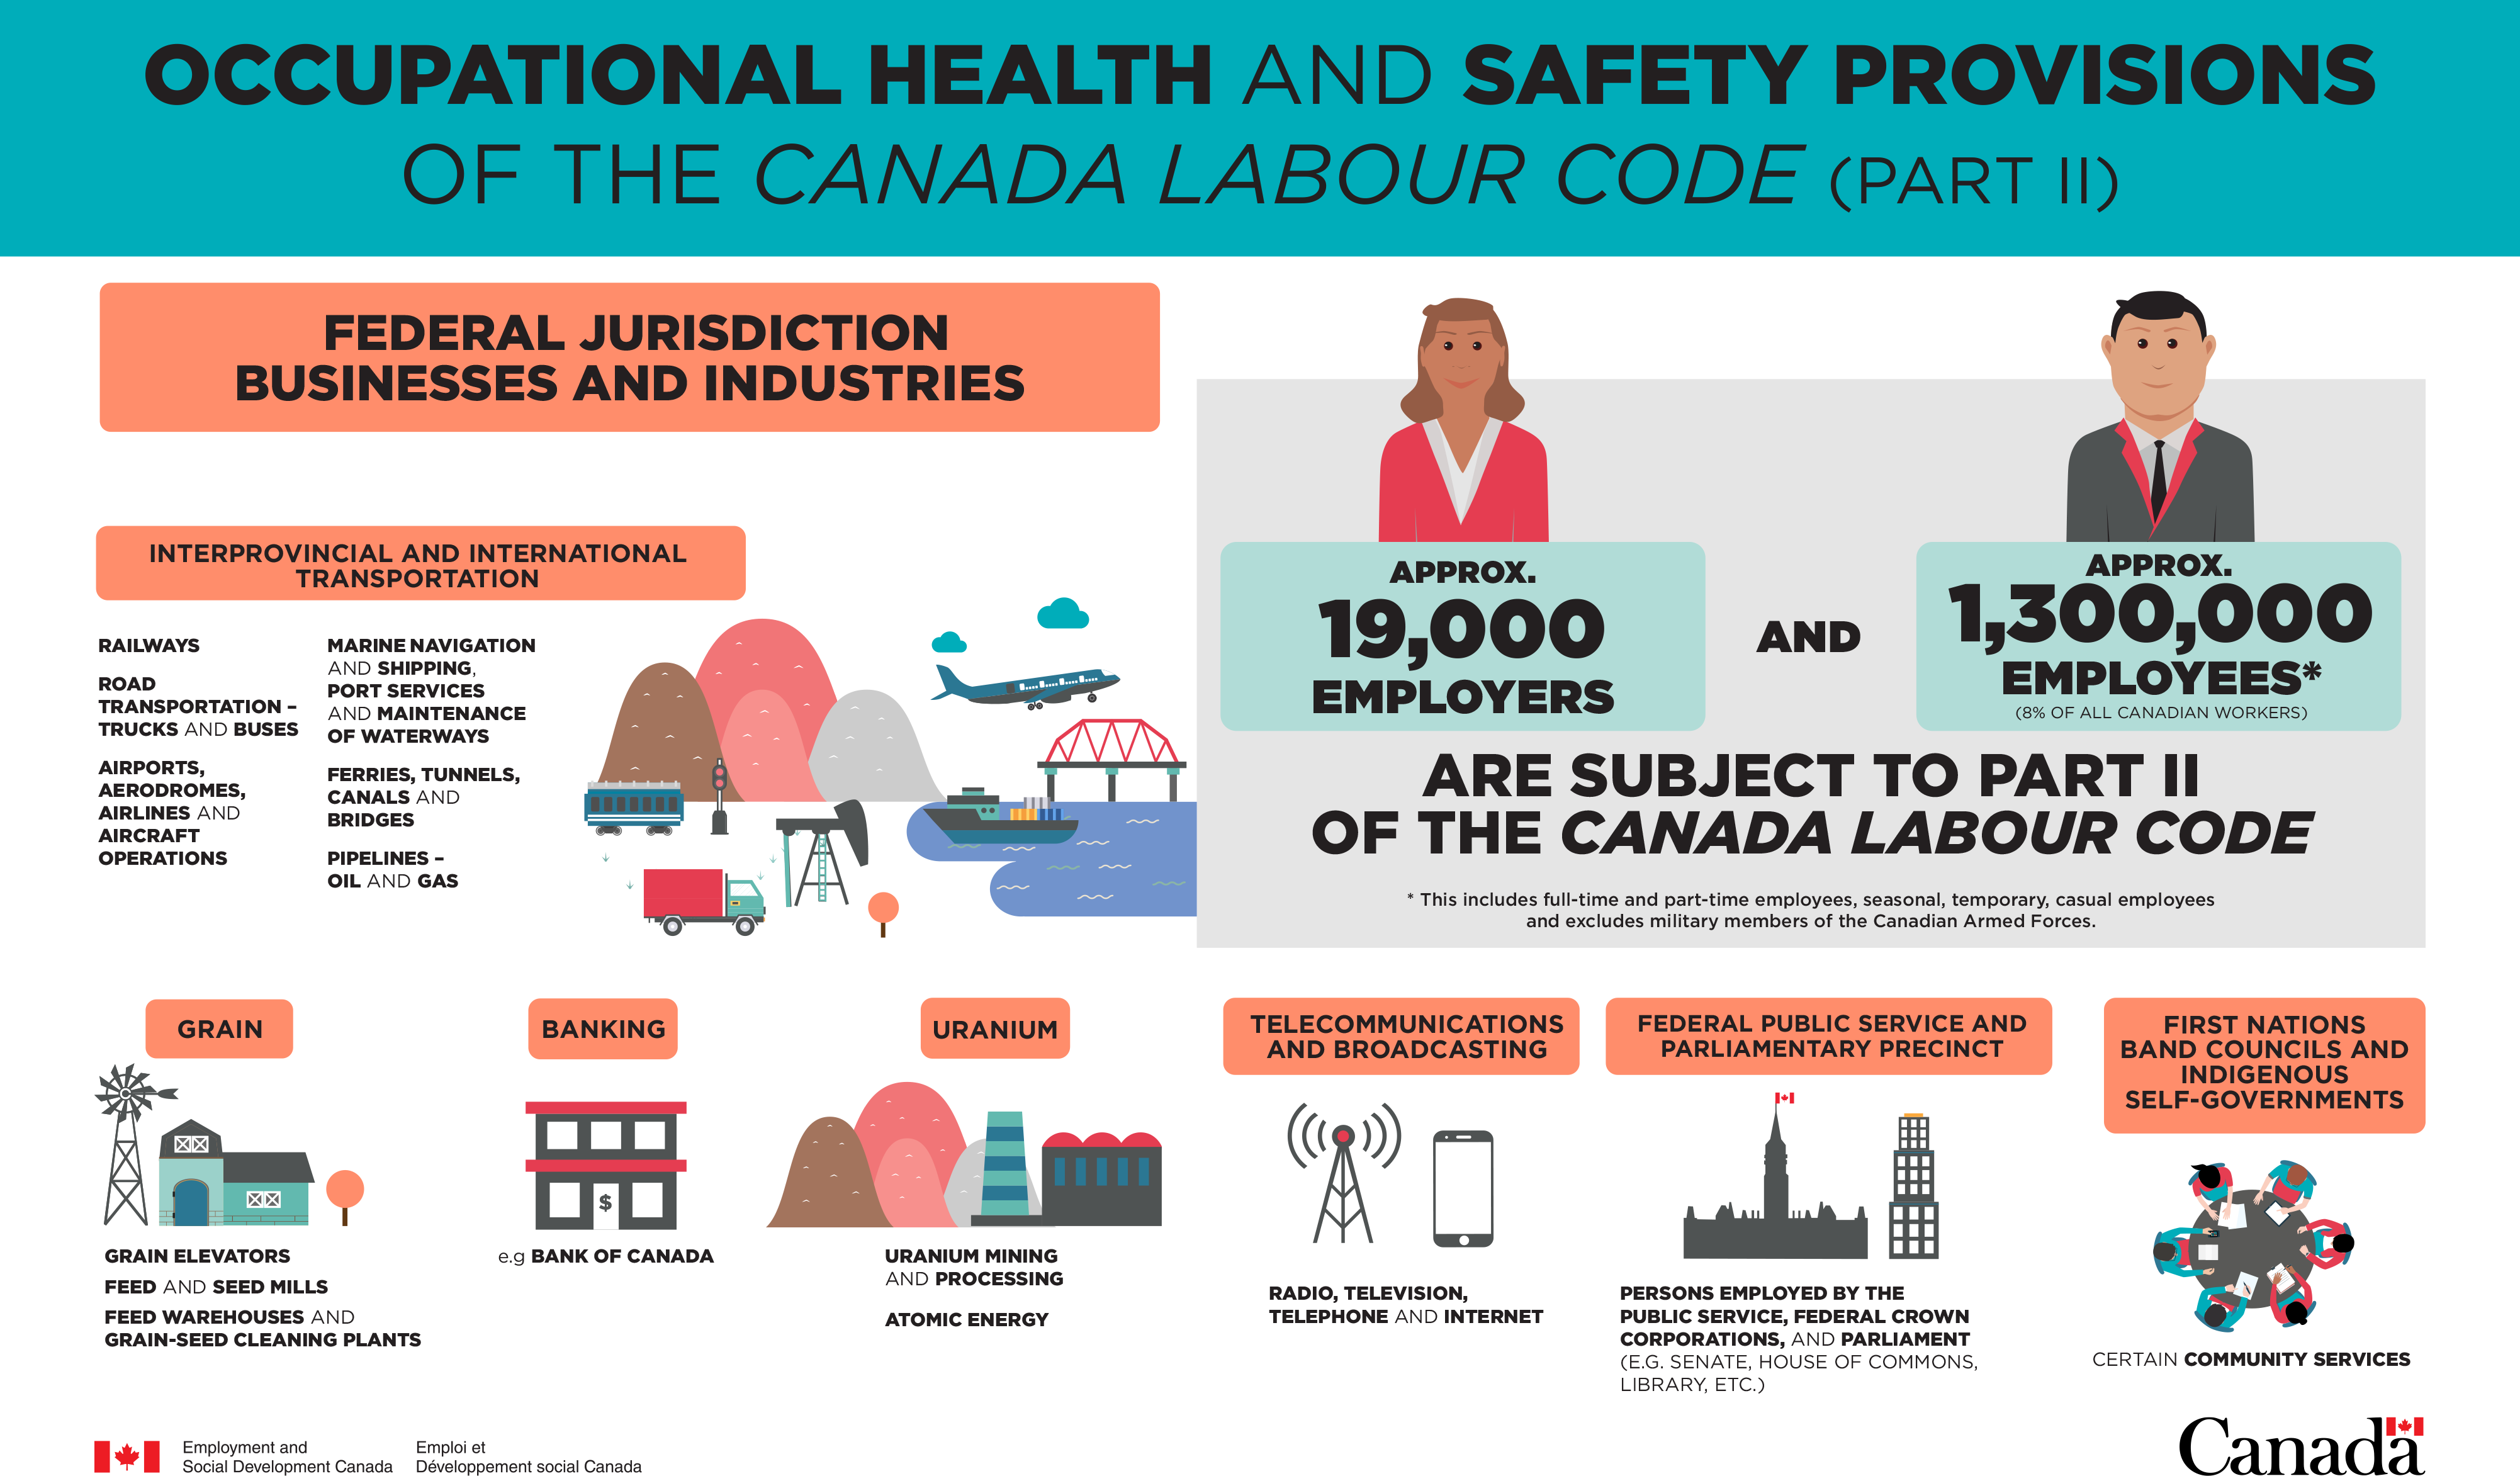 Figure 1: Occupational Health and Safety Provisions of the Canada Labour Code (Part II)